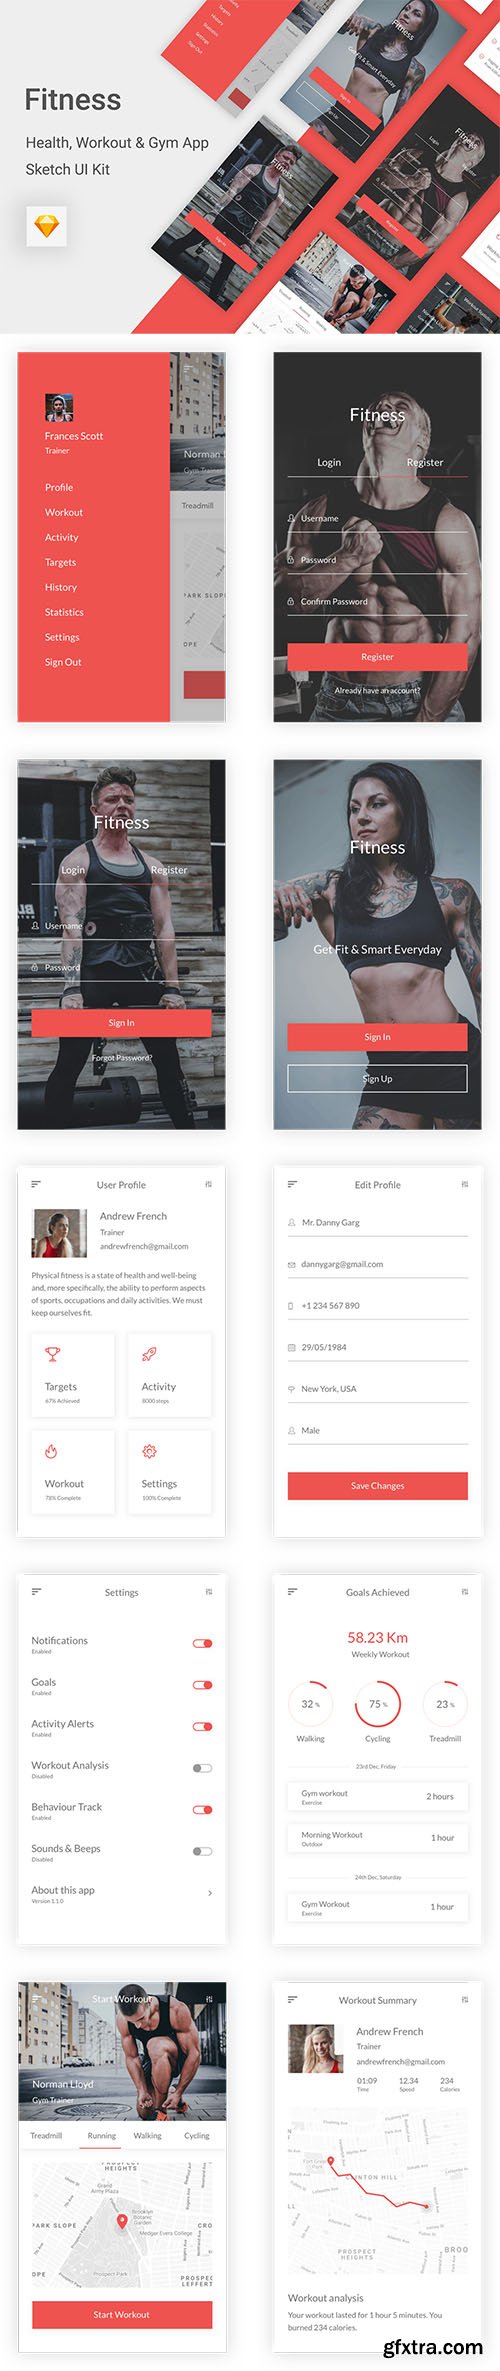 Fitness - Health, Workout & Gym UI Kit for Sketch